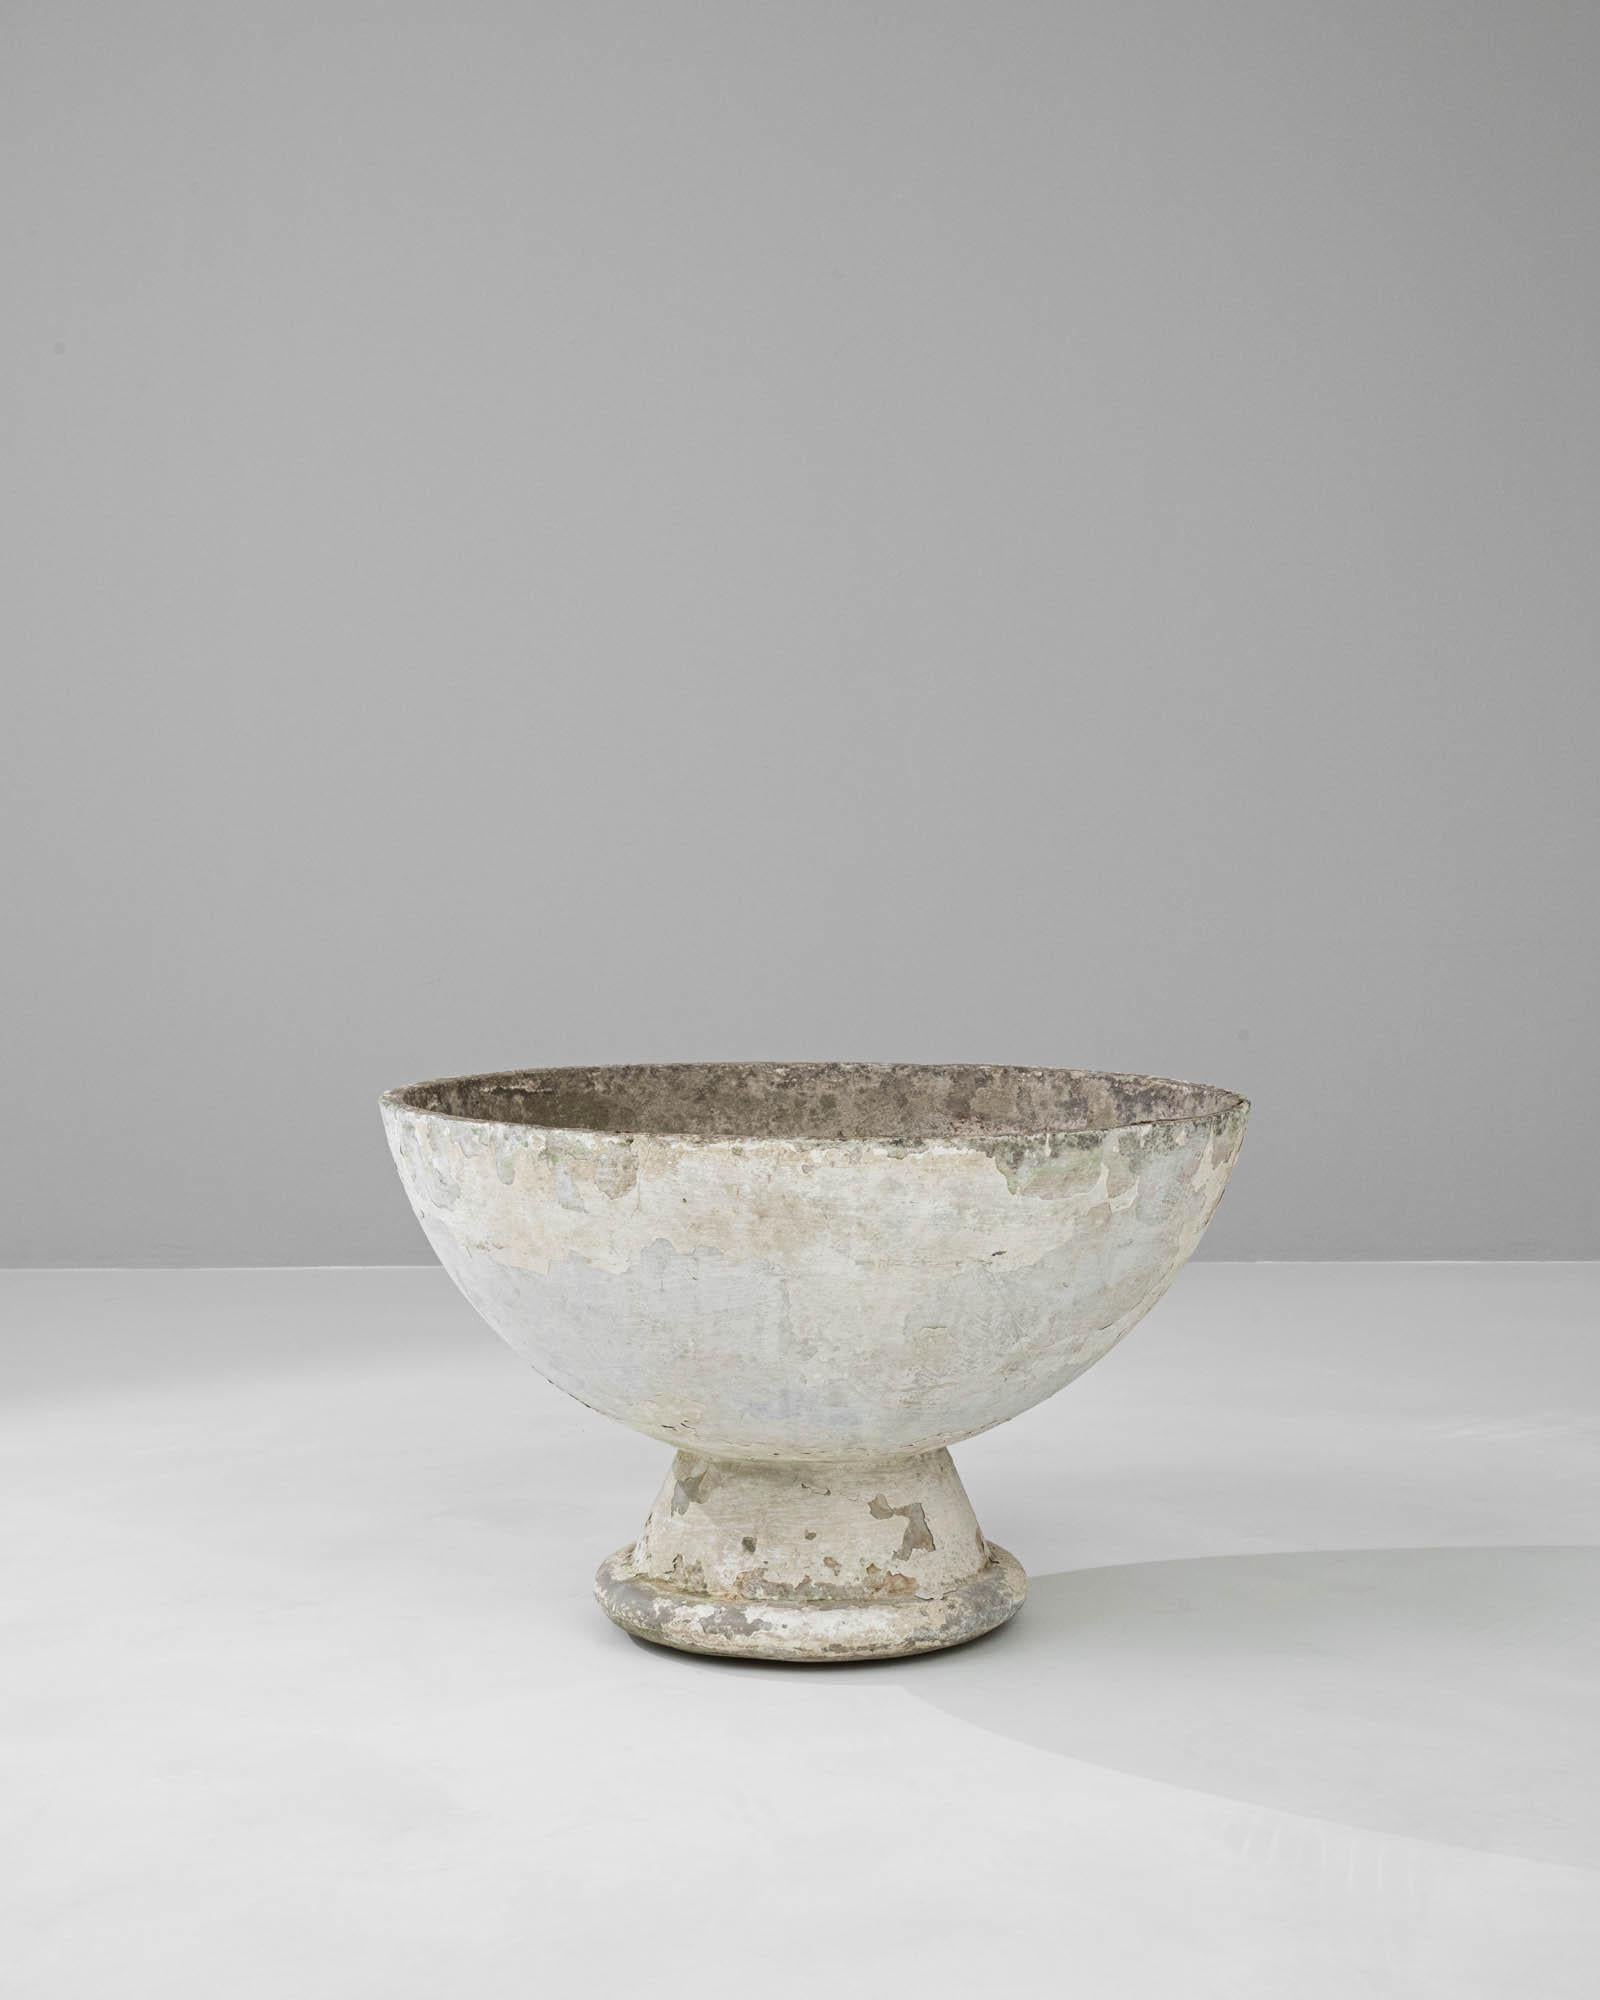 With its elegant bowl shape and sturdy pedestal, this 20th-century French concrete planter is a testament to timeless design. The worn patina, with its peeled layers and natural wear, adds a sense of history and character, suggesting it has been a